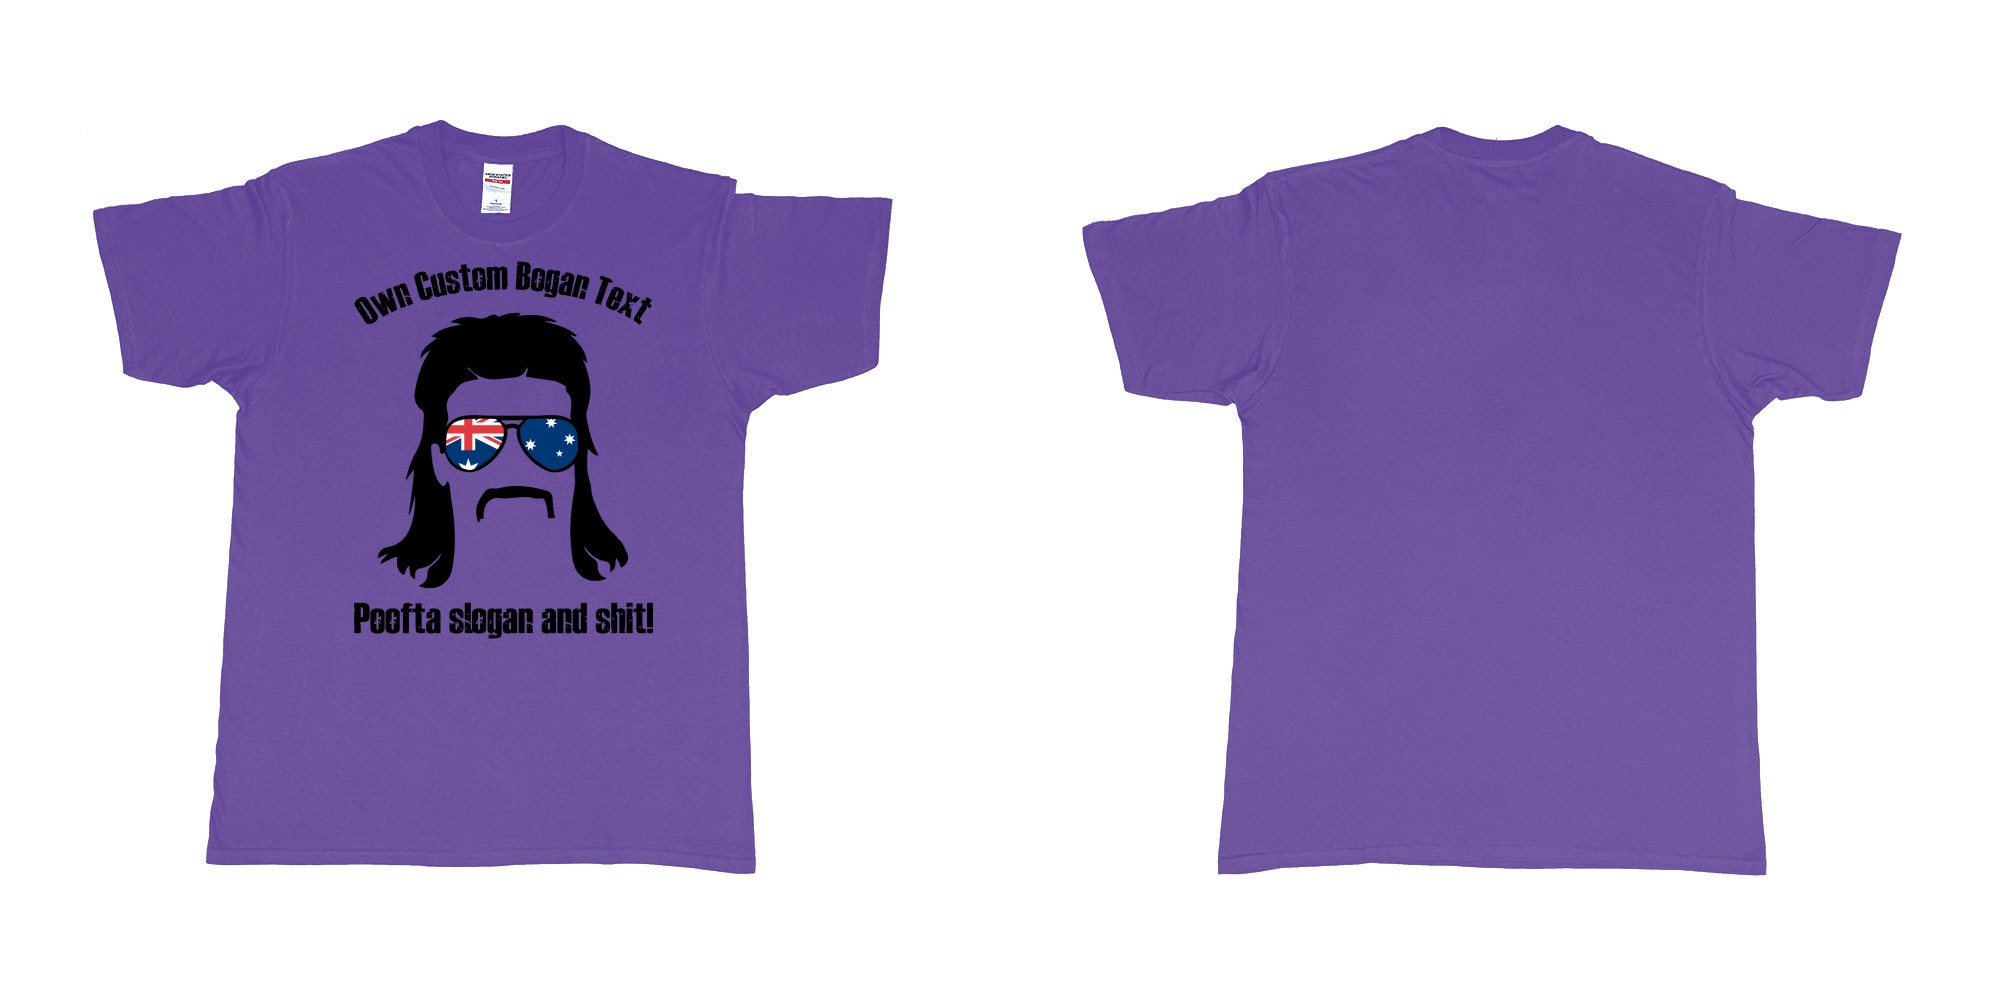 Custom tshirt design australian bogan mullet sunglasses silhouette in fabric color purple choice your own text made in Bali by The Pirate Way